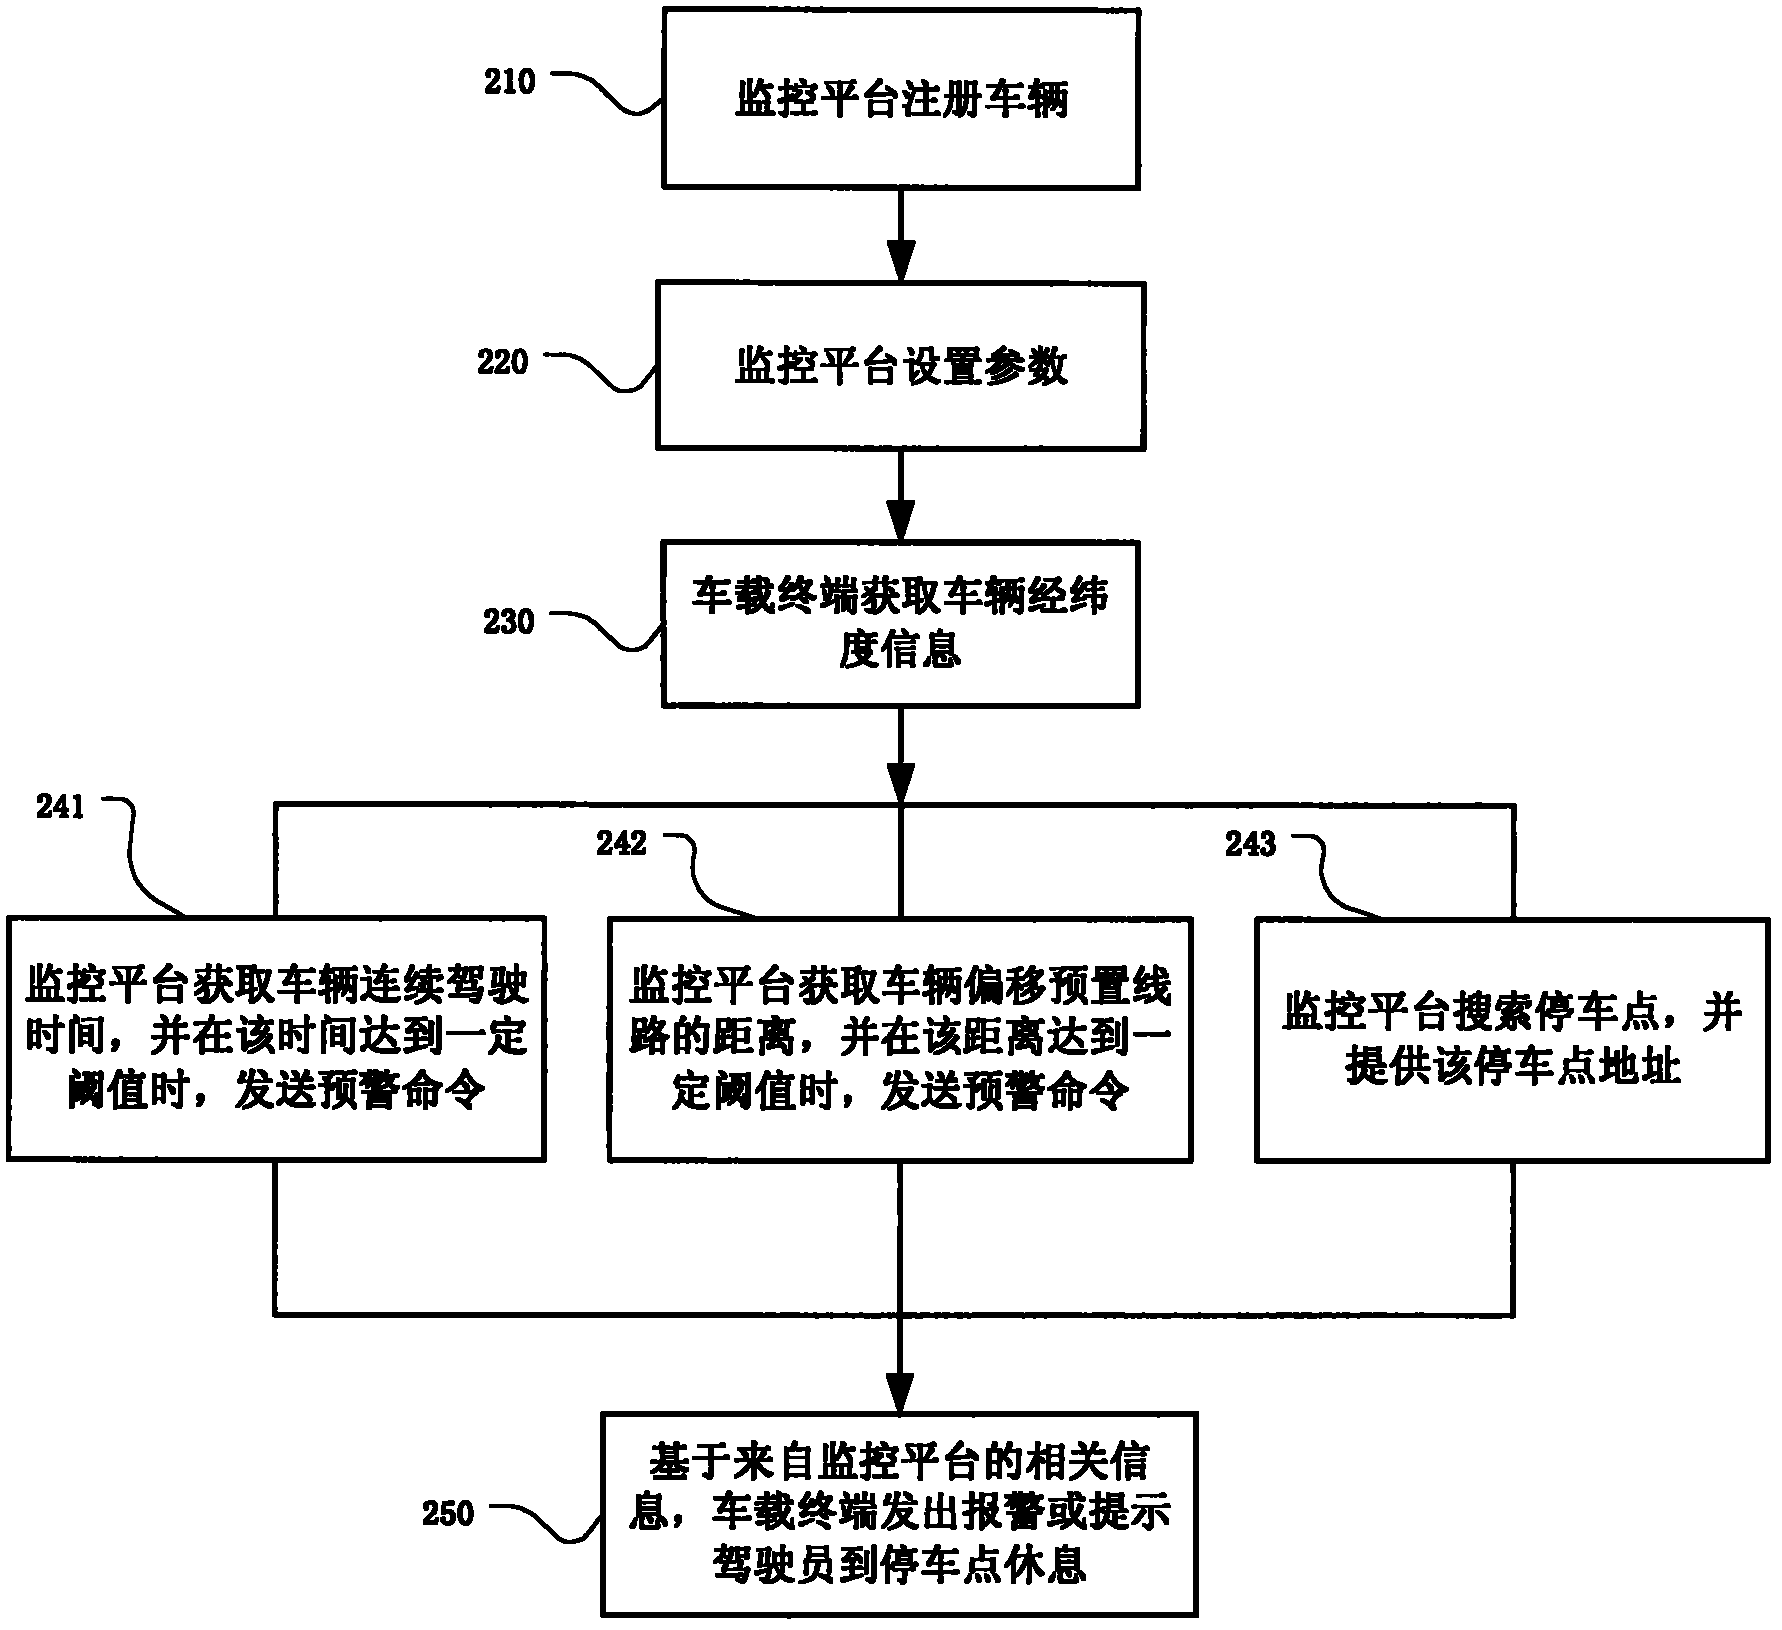 Vehicle DAS (Driver Assistant System) and method